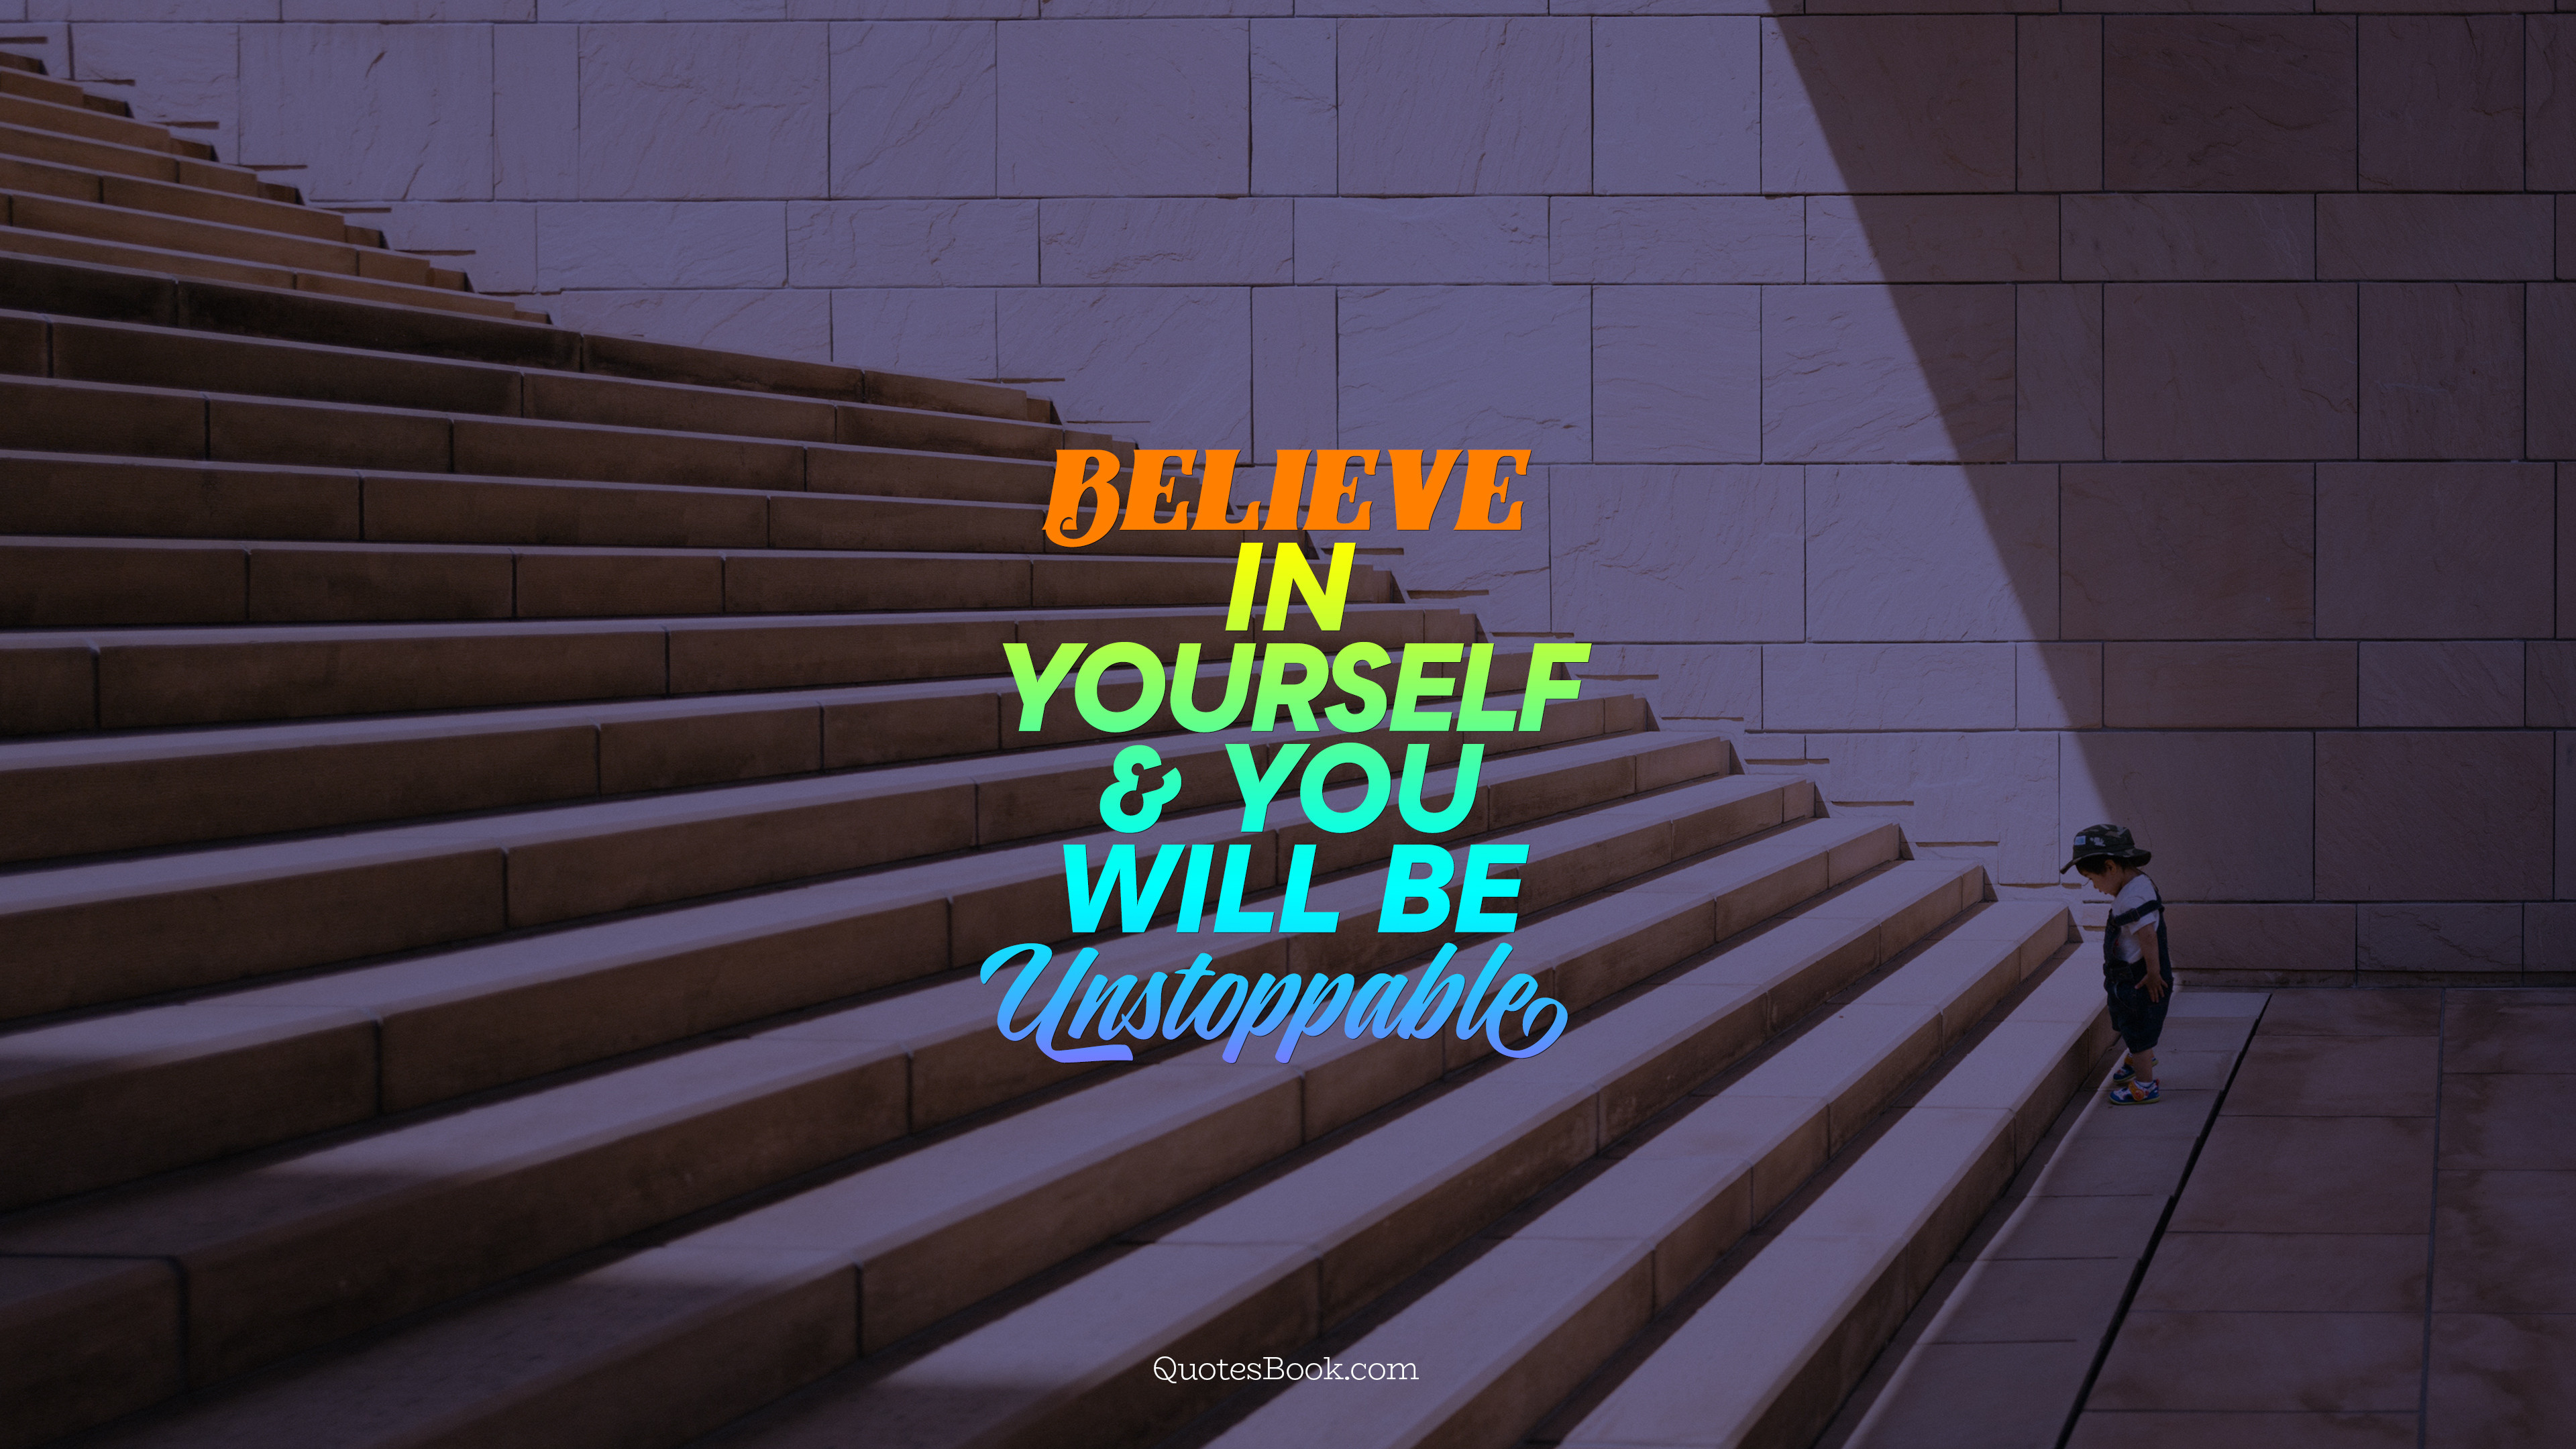 Believe in yourself & you will be unstoppable - QuotesBook